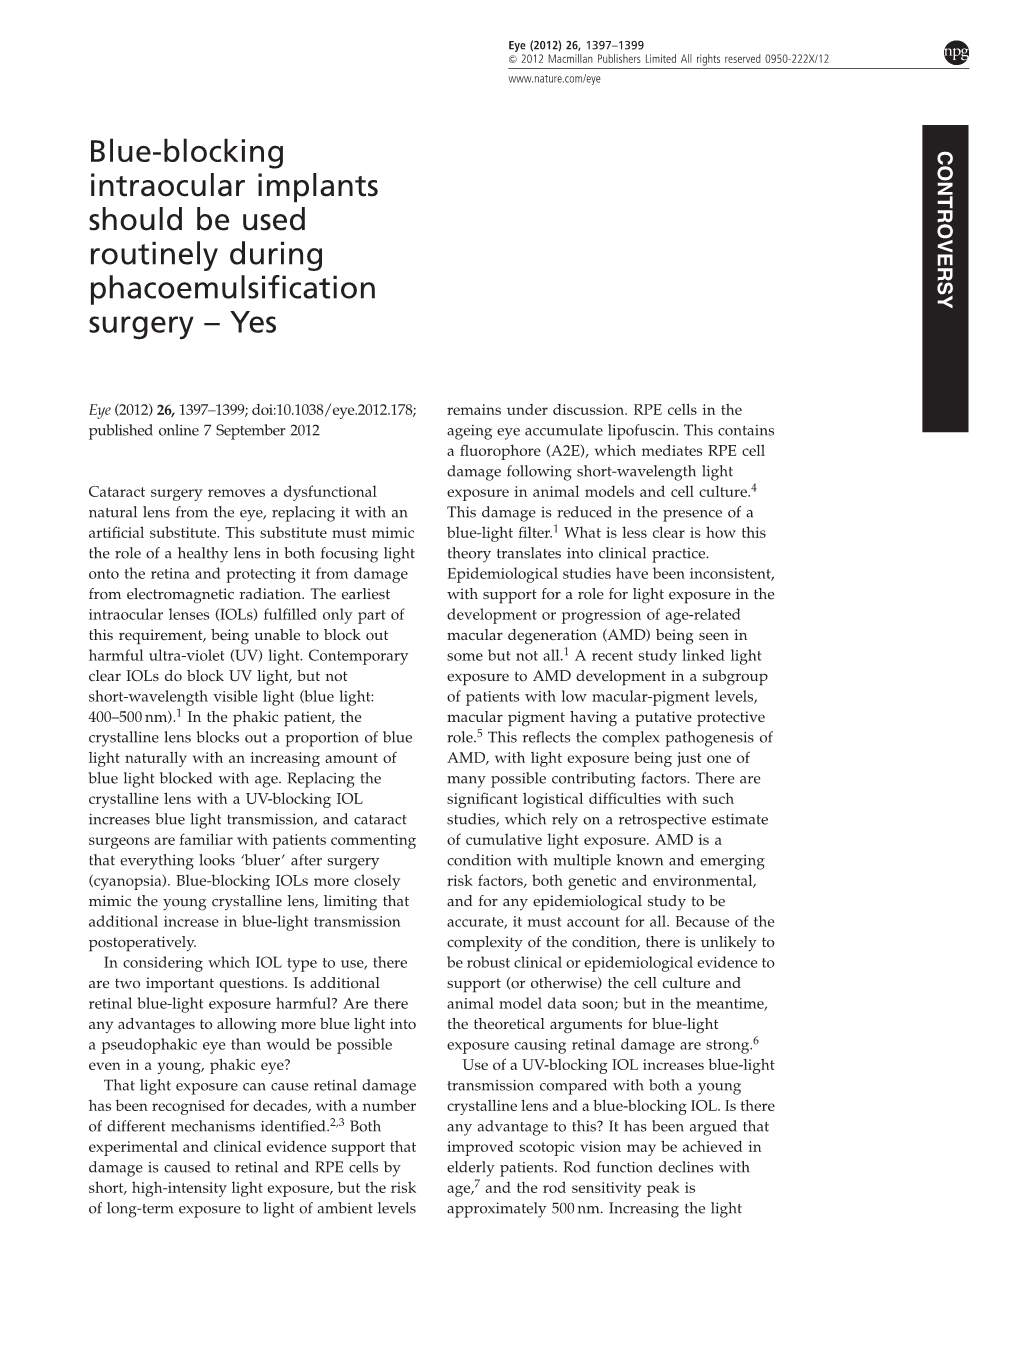 Blue-Blocking Intraocular Implants Should Be Used Routinely